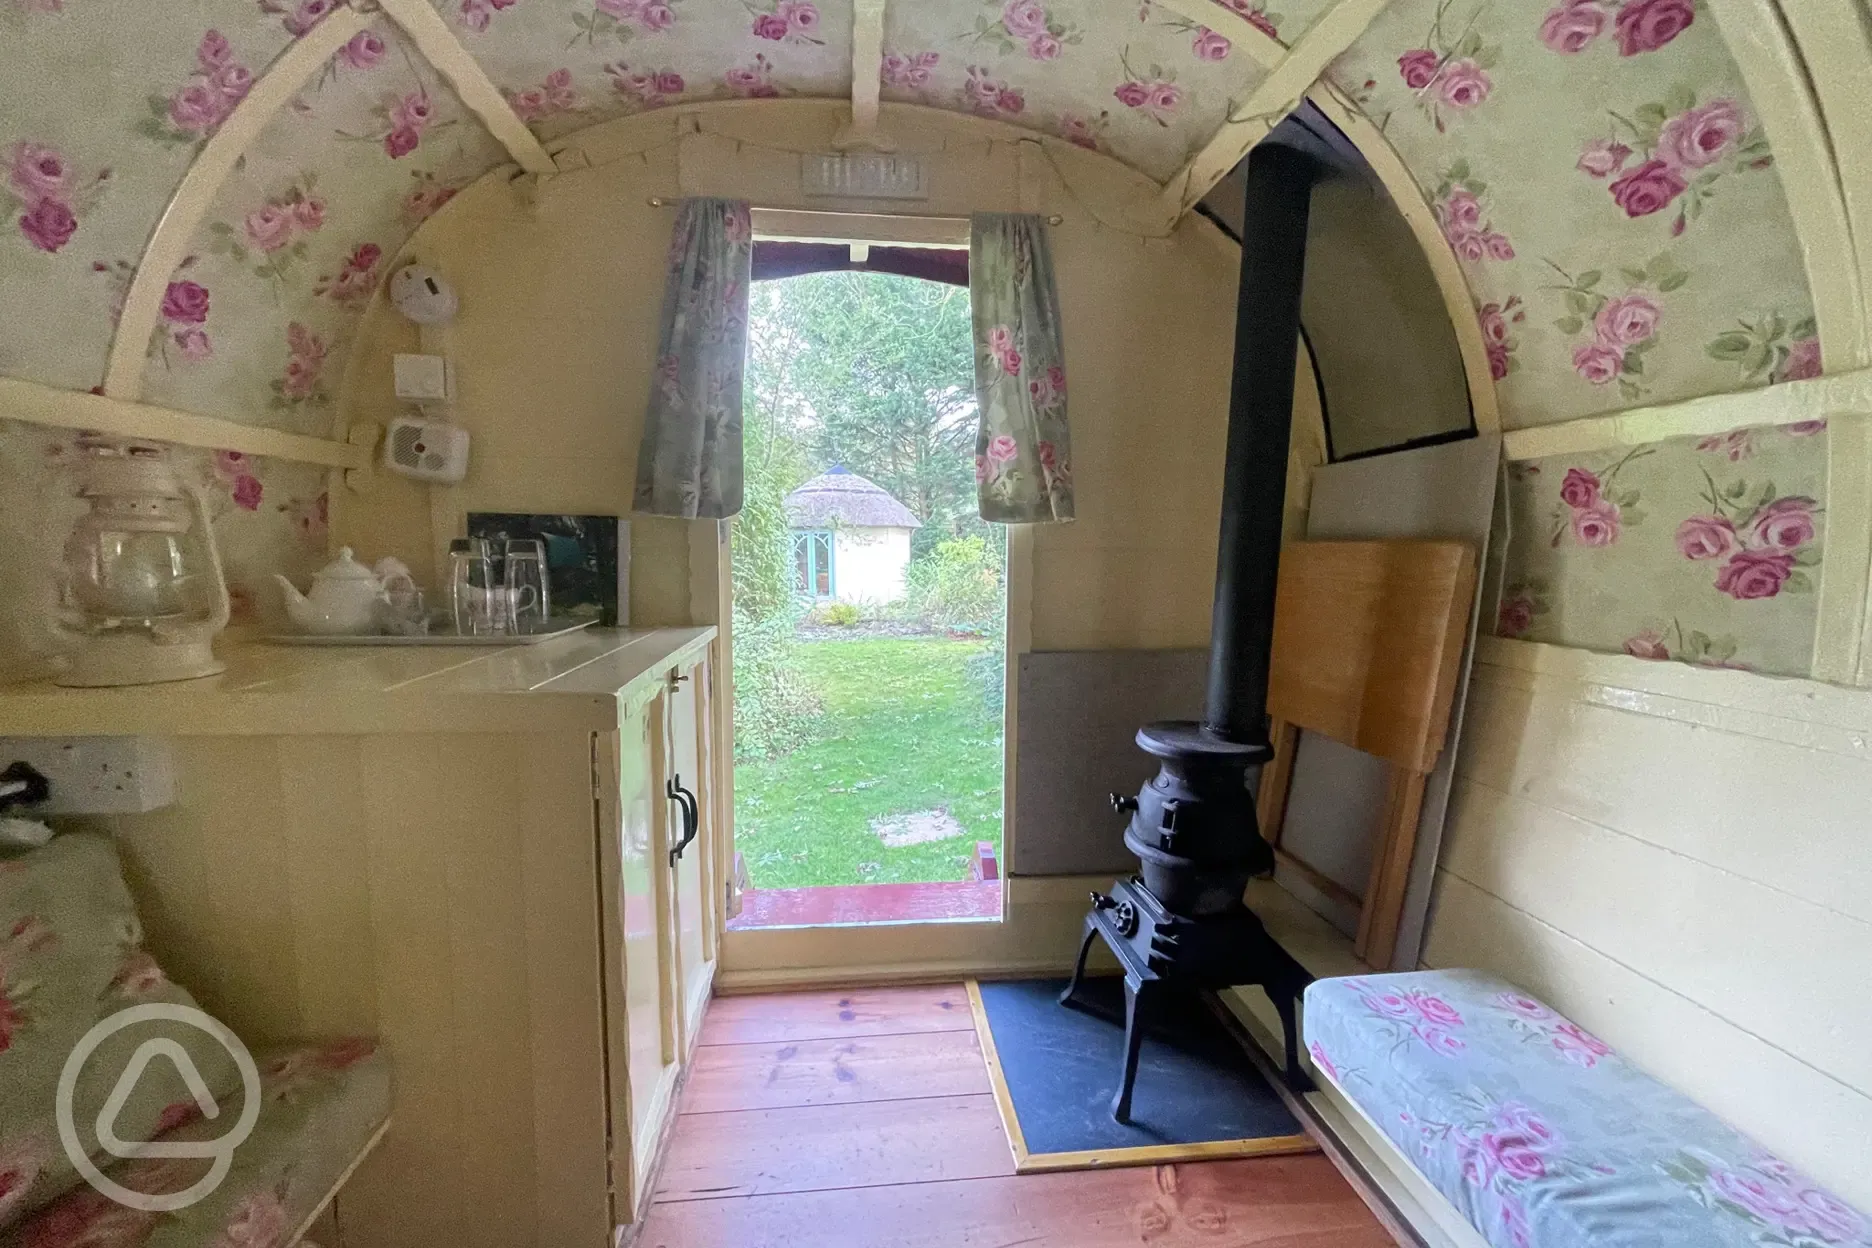 Gypsy van with bench seat, wood burner and cupboard